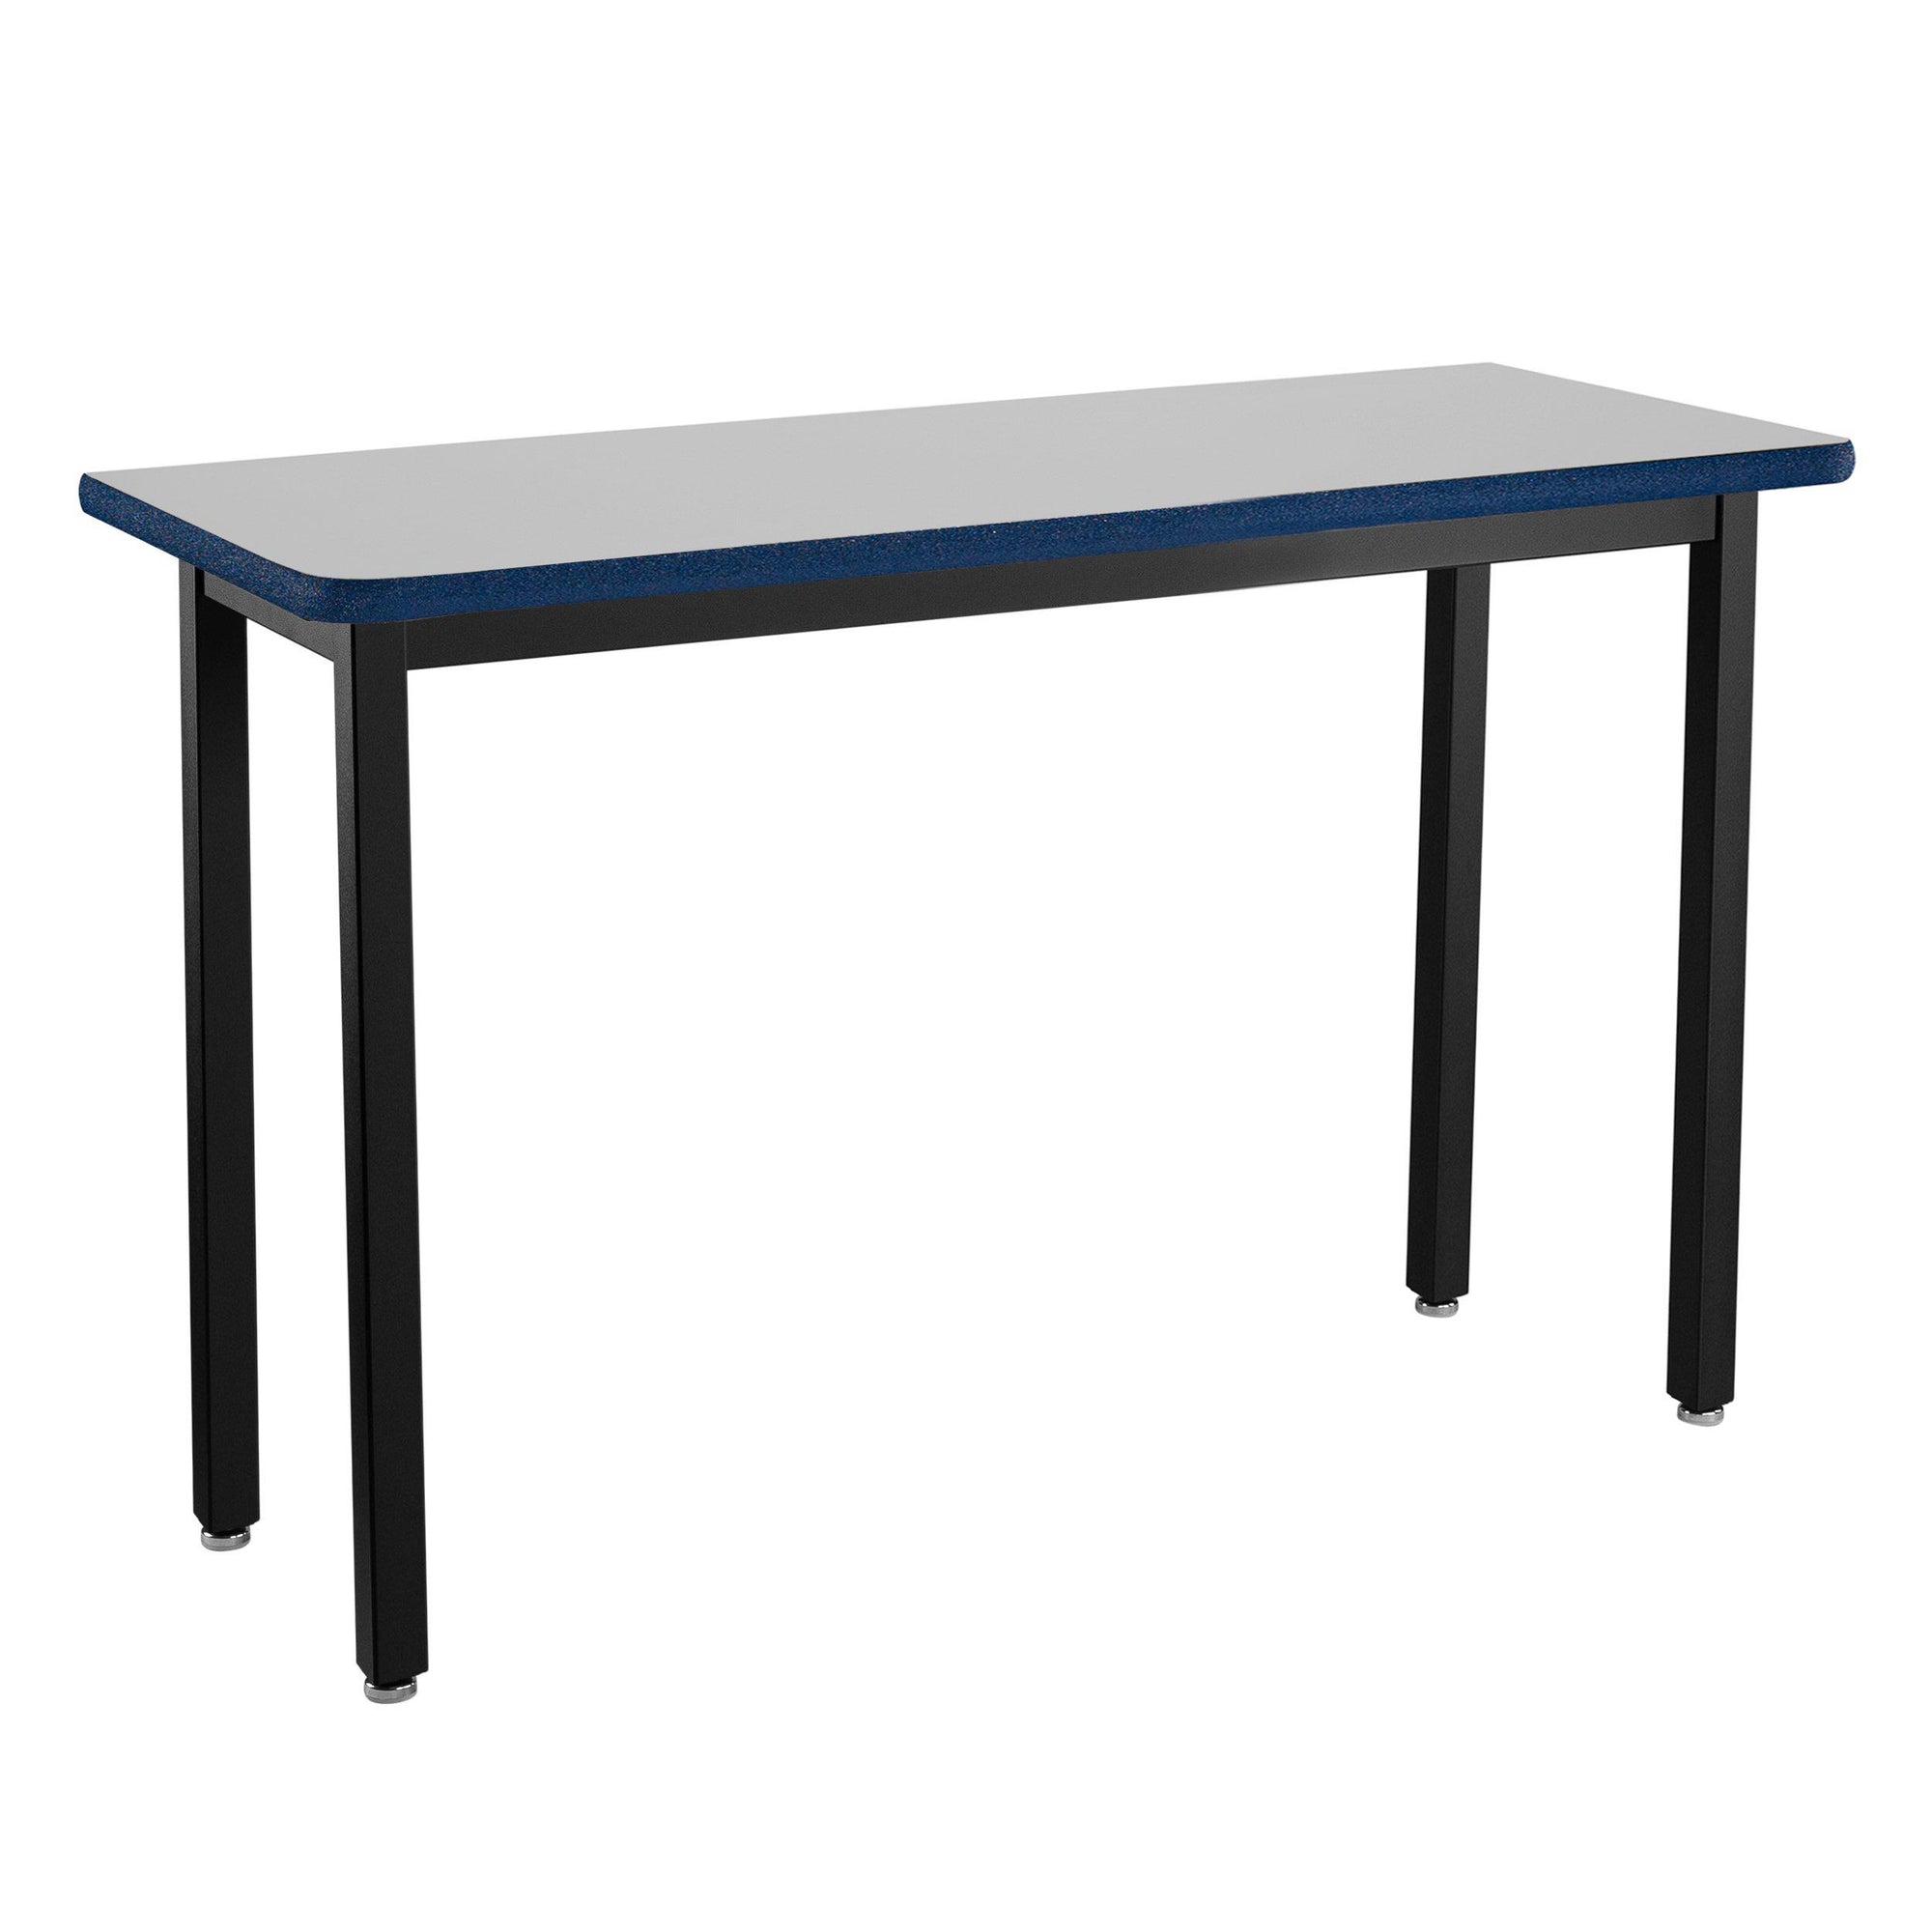 Heavy-Duty Fixed Height Utility Table, Black Frame, 18" x 60", Supreme High-Pressure Laminate Top with Black ProtectEdge